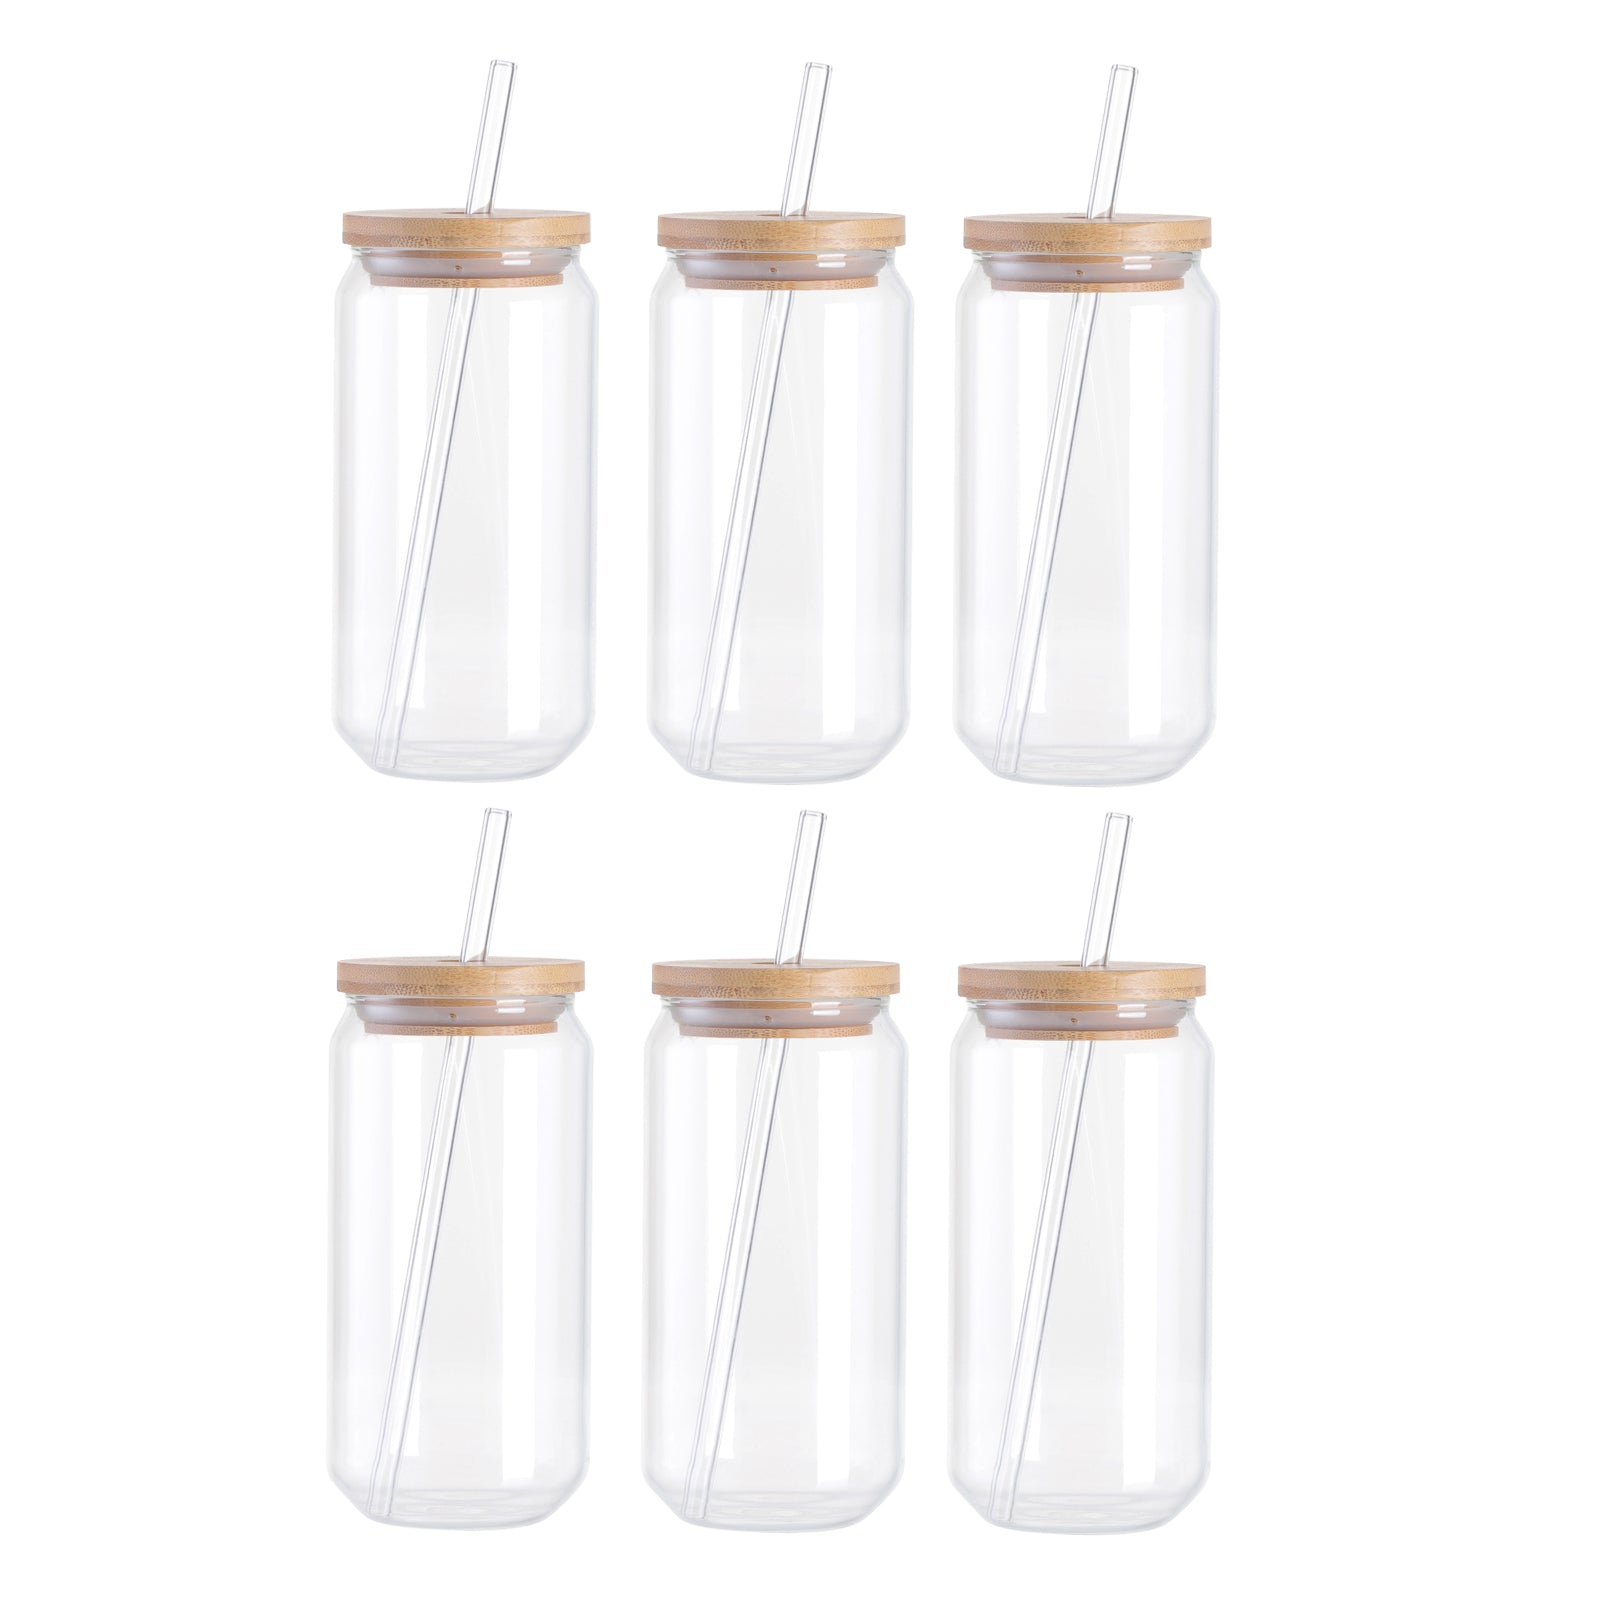 PYD Life Sublimation Blanks Glass Can Bulk Buy Sparkling Rainbow White 18 oz with Bamboo Lid and Glass Straw 18oz / White / Glass